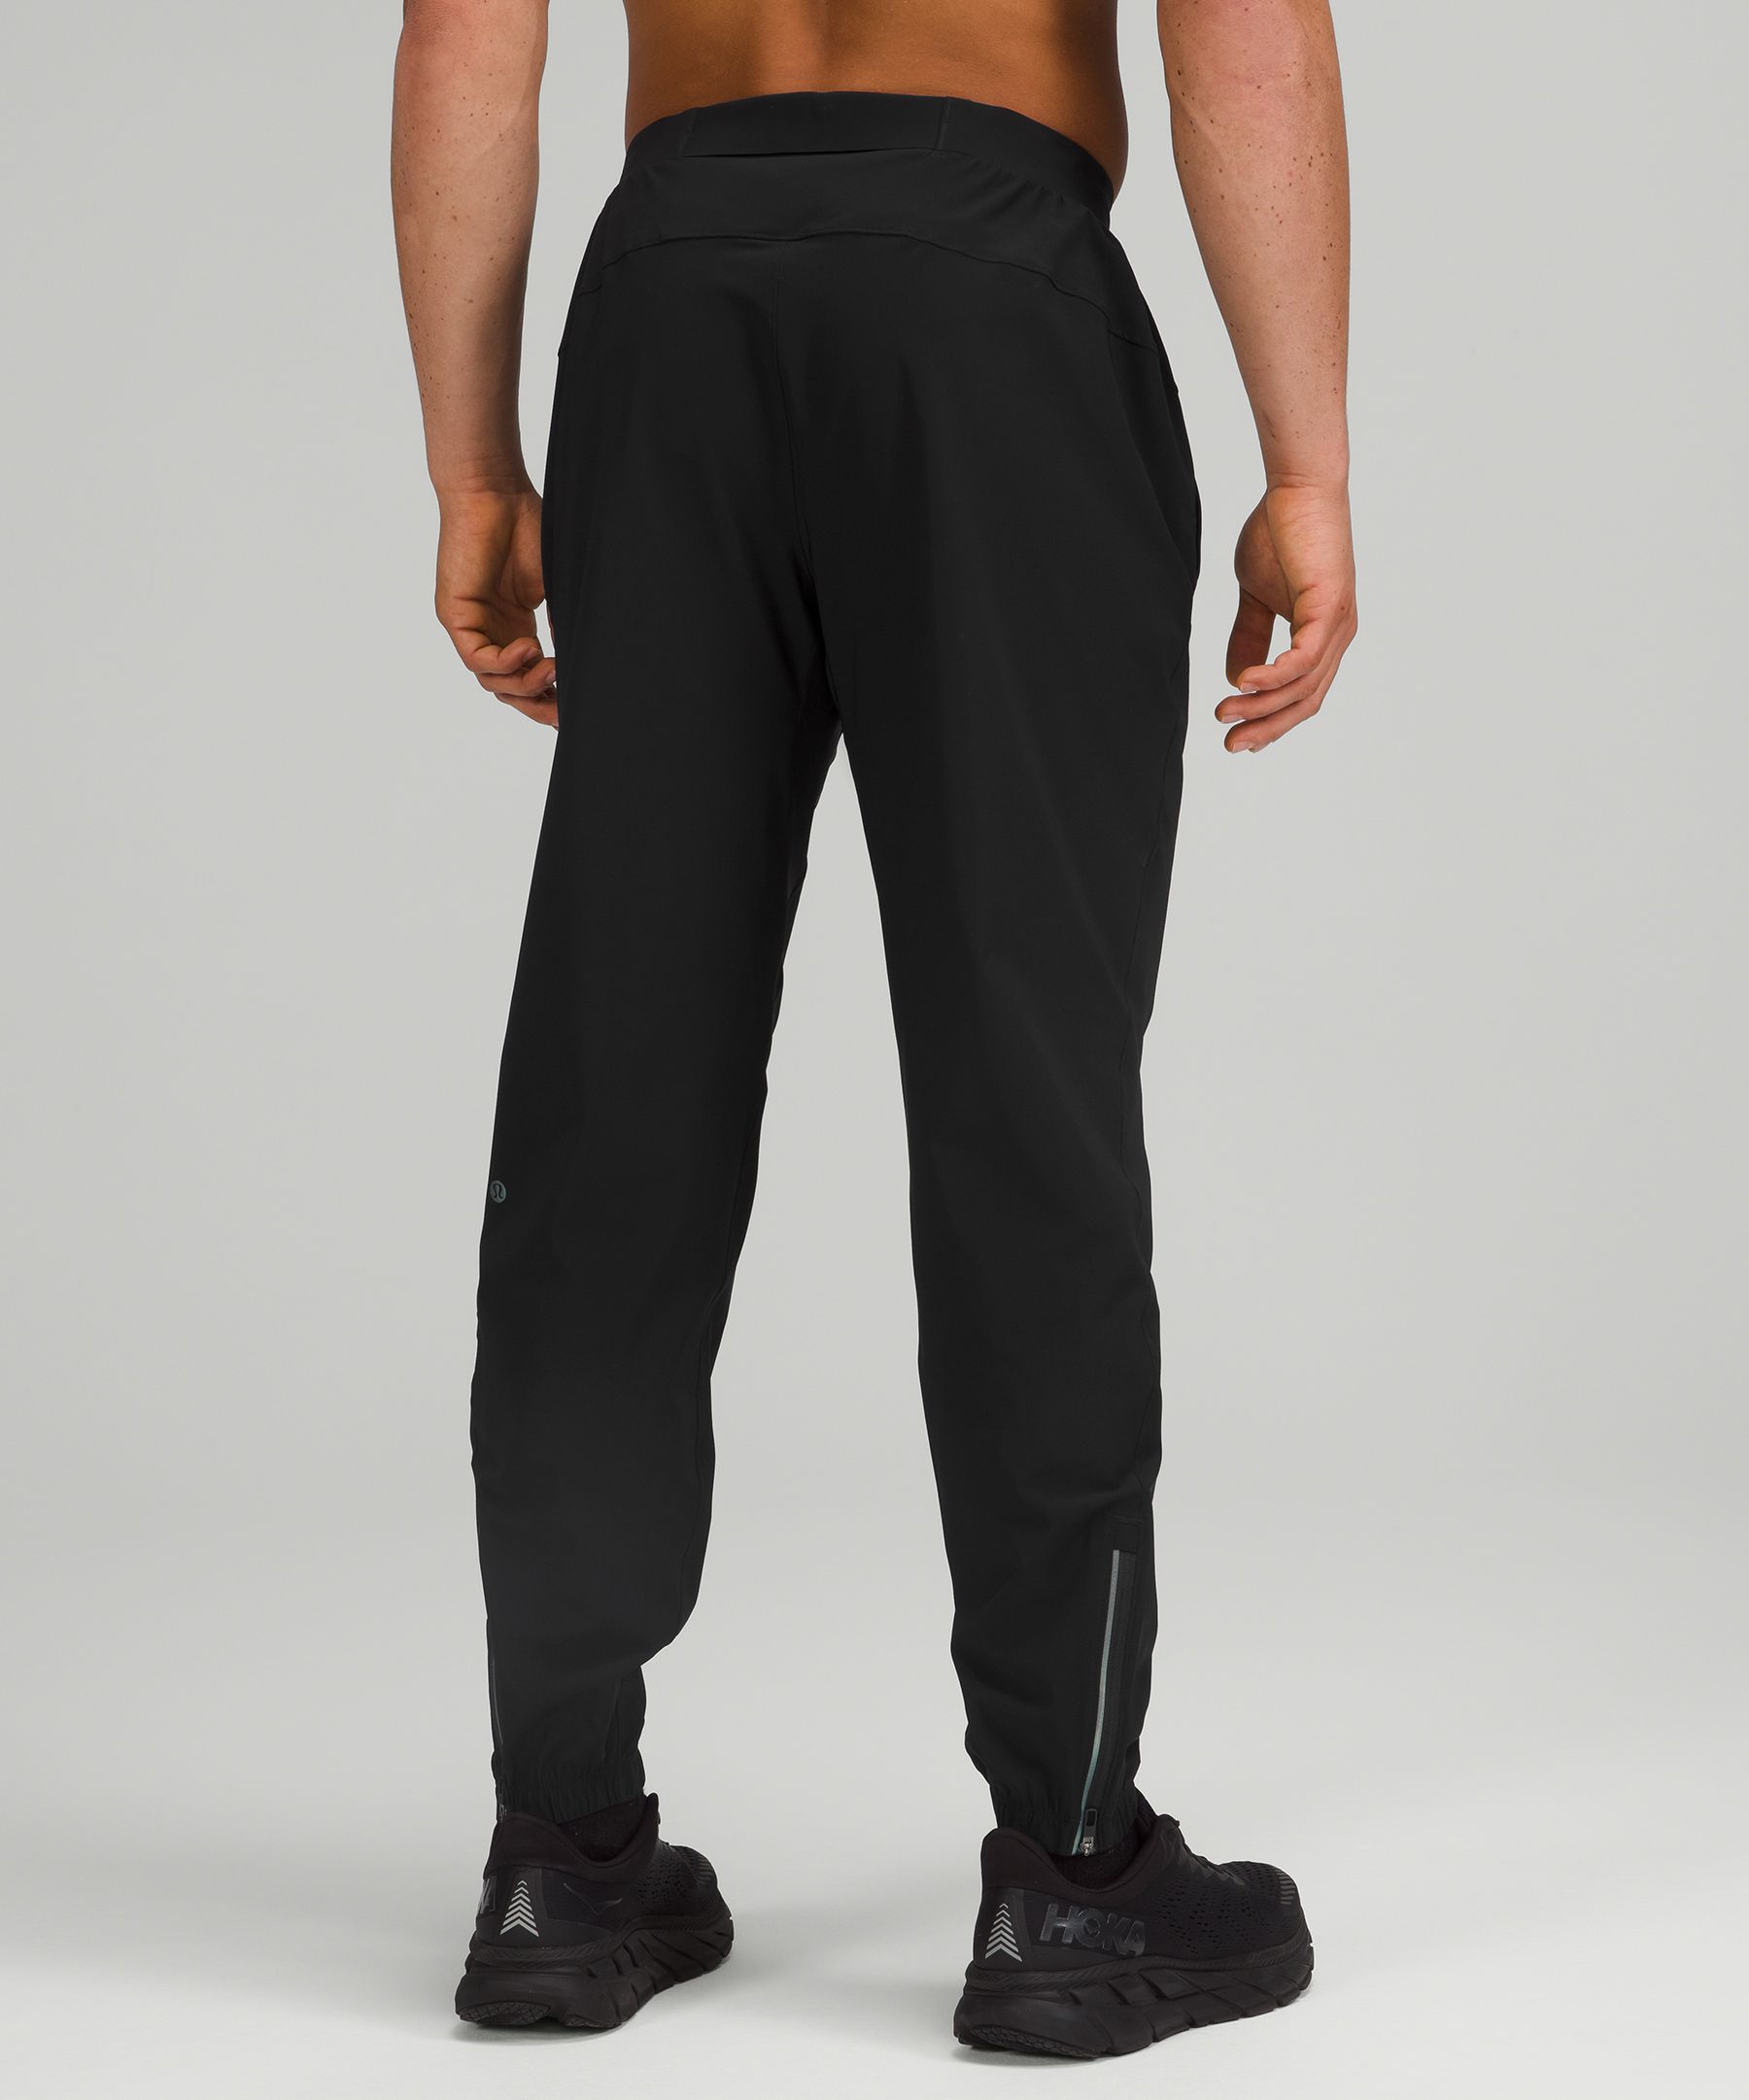 Where can I get this color for the surge jogger? : r/Lululemen